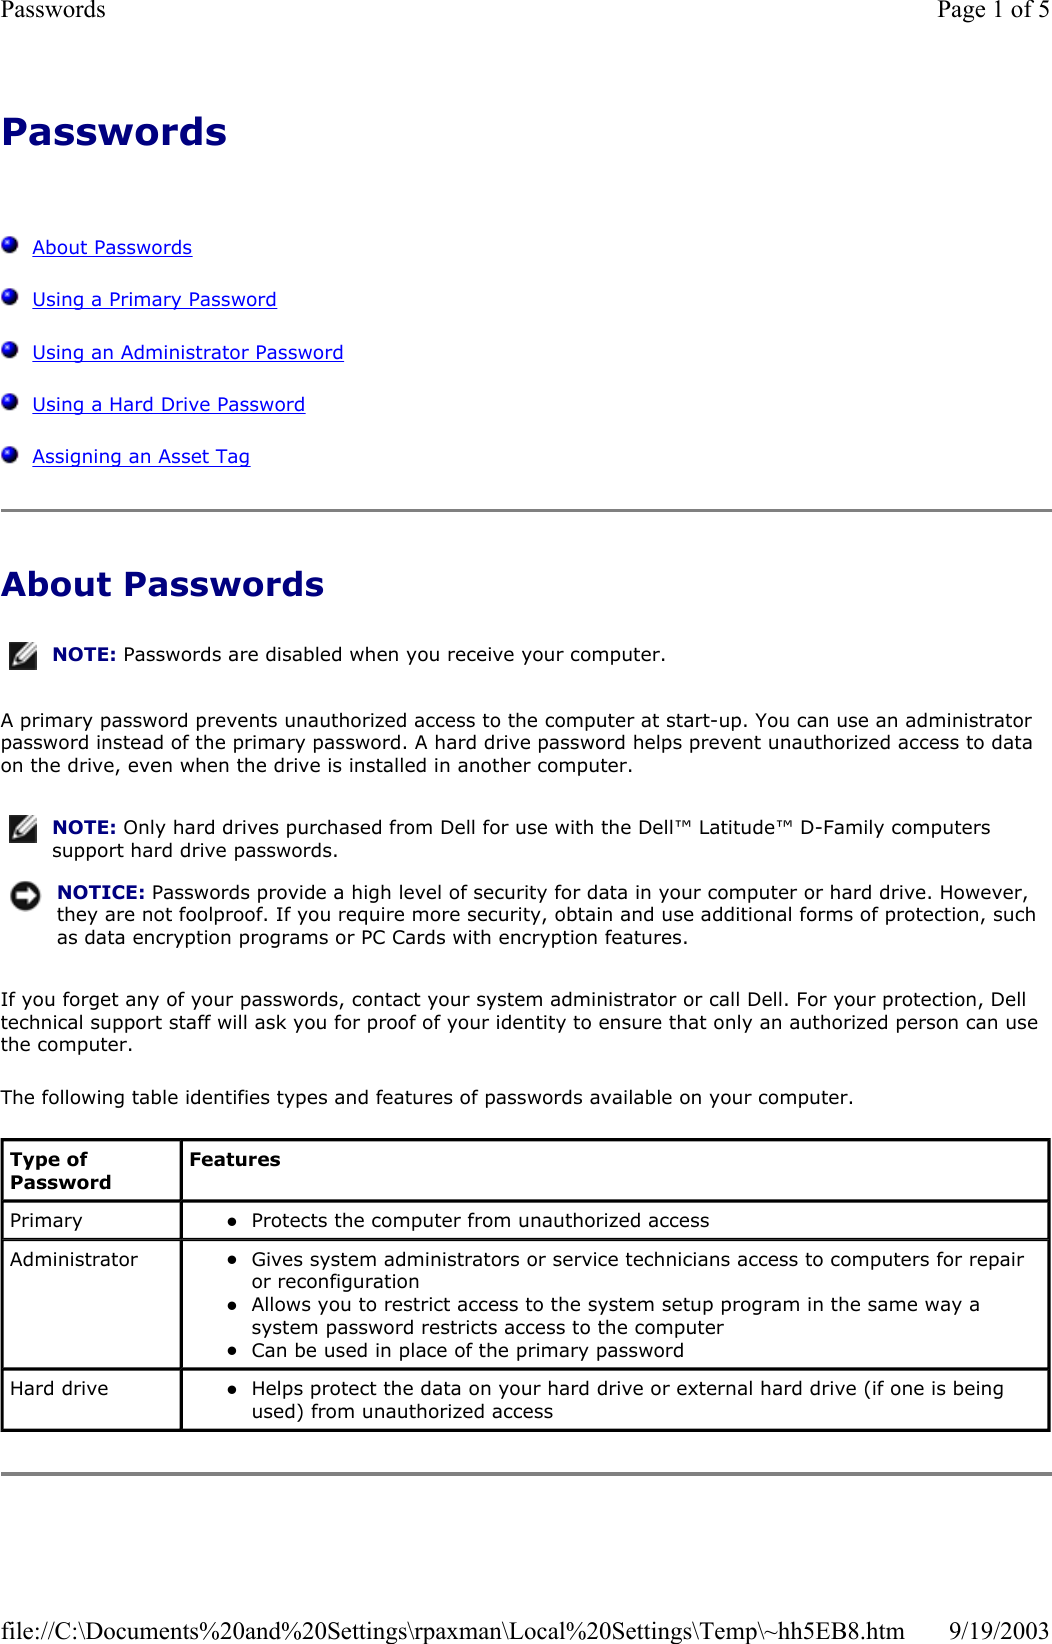 Passwords      About Passwords   Using a Primary Password   Using an Administrator Password   Using a Hard Drive Password   Assigning an Asset Tag About Passwords A primary password prevents unauthorized access to the computer at start-up. You can use an administrator password instead of the primary password. A hard drive password helps prevent unauthorized access to data on the drive, even when the drive is installed in another computer. If you forget any of your passwords, contact your system administrator or call Dell. For your protection, Dell technical support staff will ask you for proof of your identity to ensure that only an authorized person can use the computer. The following table identifies types and features of passwords available on your computer. NOTE: Passwords are disabled when you receive your computer.NOTE: Only hard drives purchased from Dell for use with the Dell™ Latitude™ D-Family computers support hard drive passwords.NOTICE: Passwords provide a high level of security for data in your computer or hard drive. However, they are not foolproof. If you require more security, obtain and use additional forms of protection, such as data encryption programs or PC Cards with encryption features. Type of Password Features Primary  zProtects the computer from unauthorized access  Administrator  zGives system administrators or service technicians access to computers for repair or reconfiguration  zAllows you to restrict access to the system setup program in the same way a system password restricts access to the computer  zCan be used in place of the primary password  Hard drive  zHelps protect the data on your hard drive or external hard drive (if one is being used) from unauthorized access  Page 1 of 5Passwords9/19/2003file://C:\Documents%20and%20Settings\rpaxman\Local%20Settings\Temp\~hh5EB8.htm